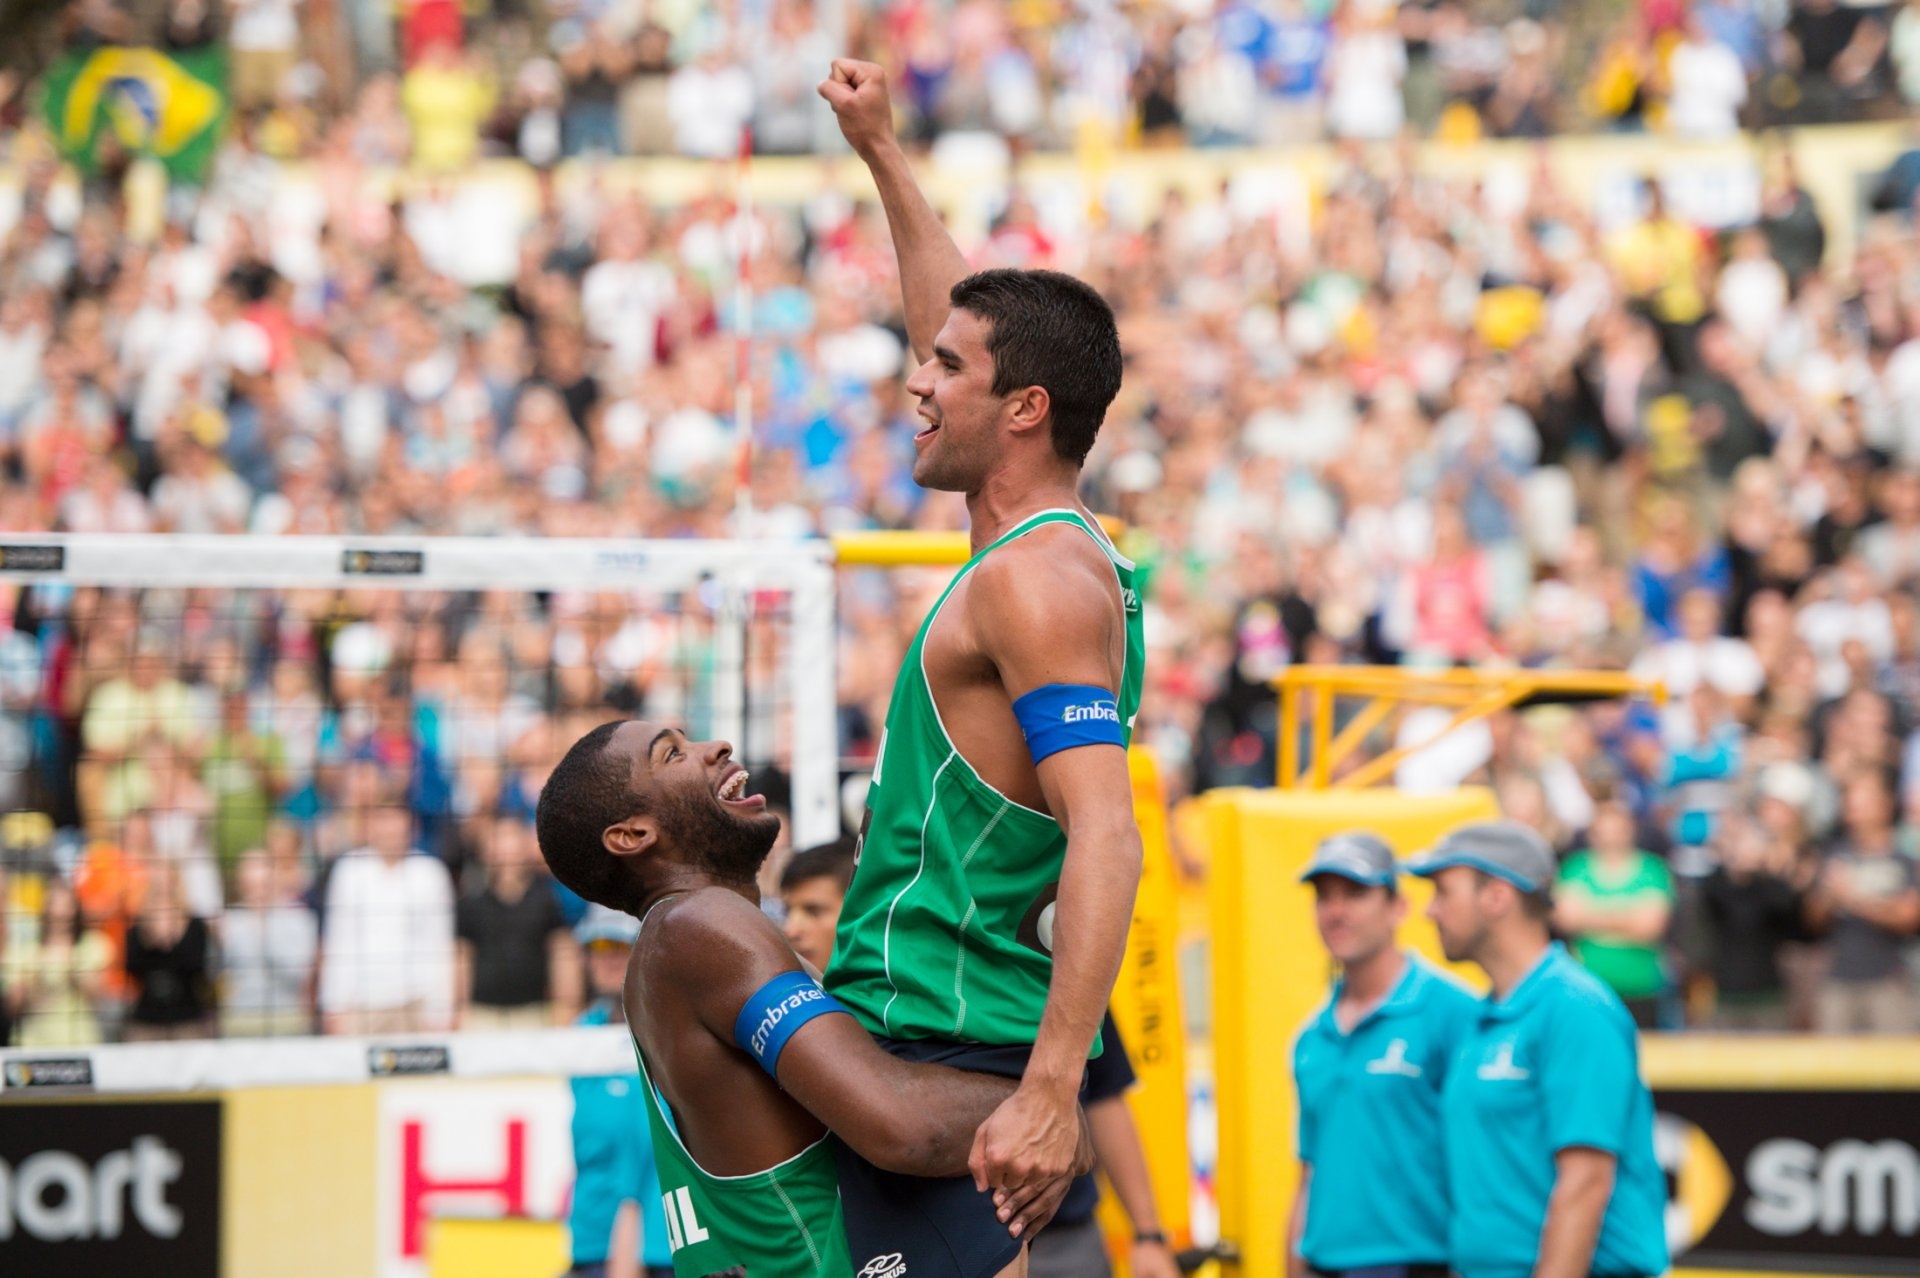 Evandro an Vitor won the Berlin tournament of the World Tour in their first stint together (Photocredit: FIVB)